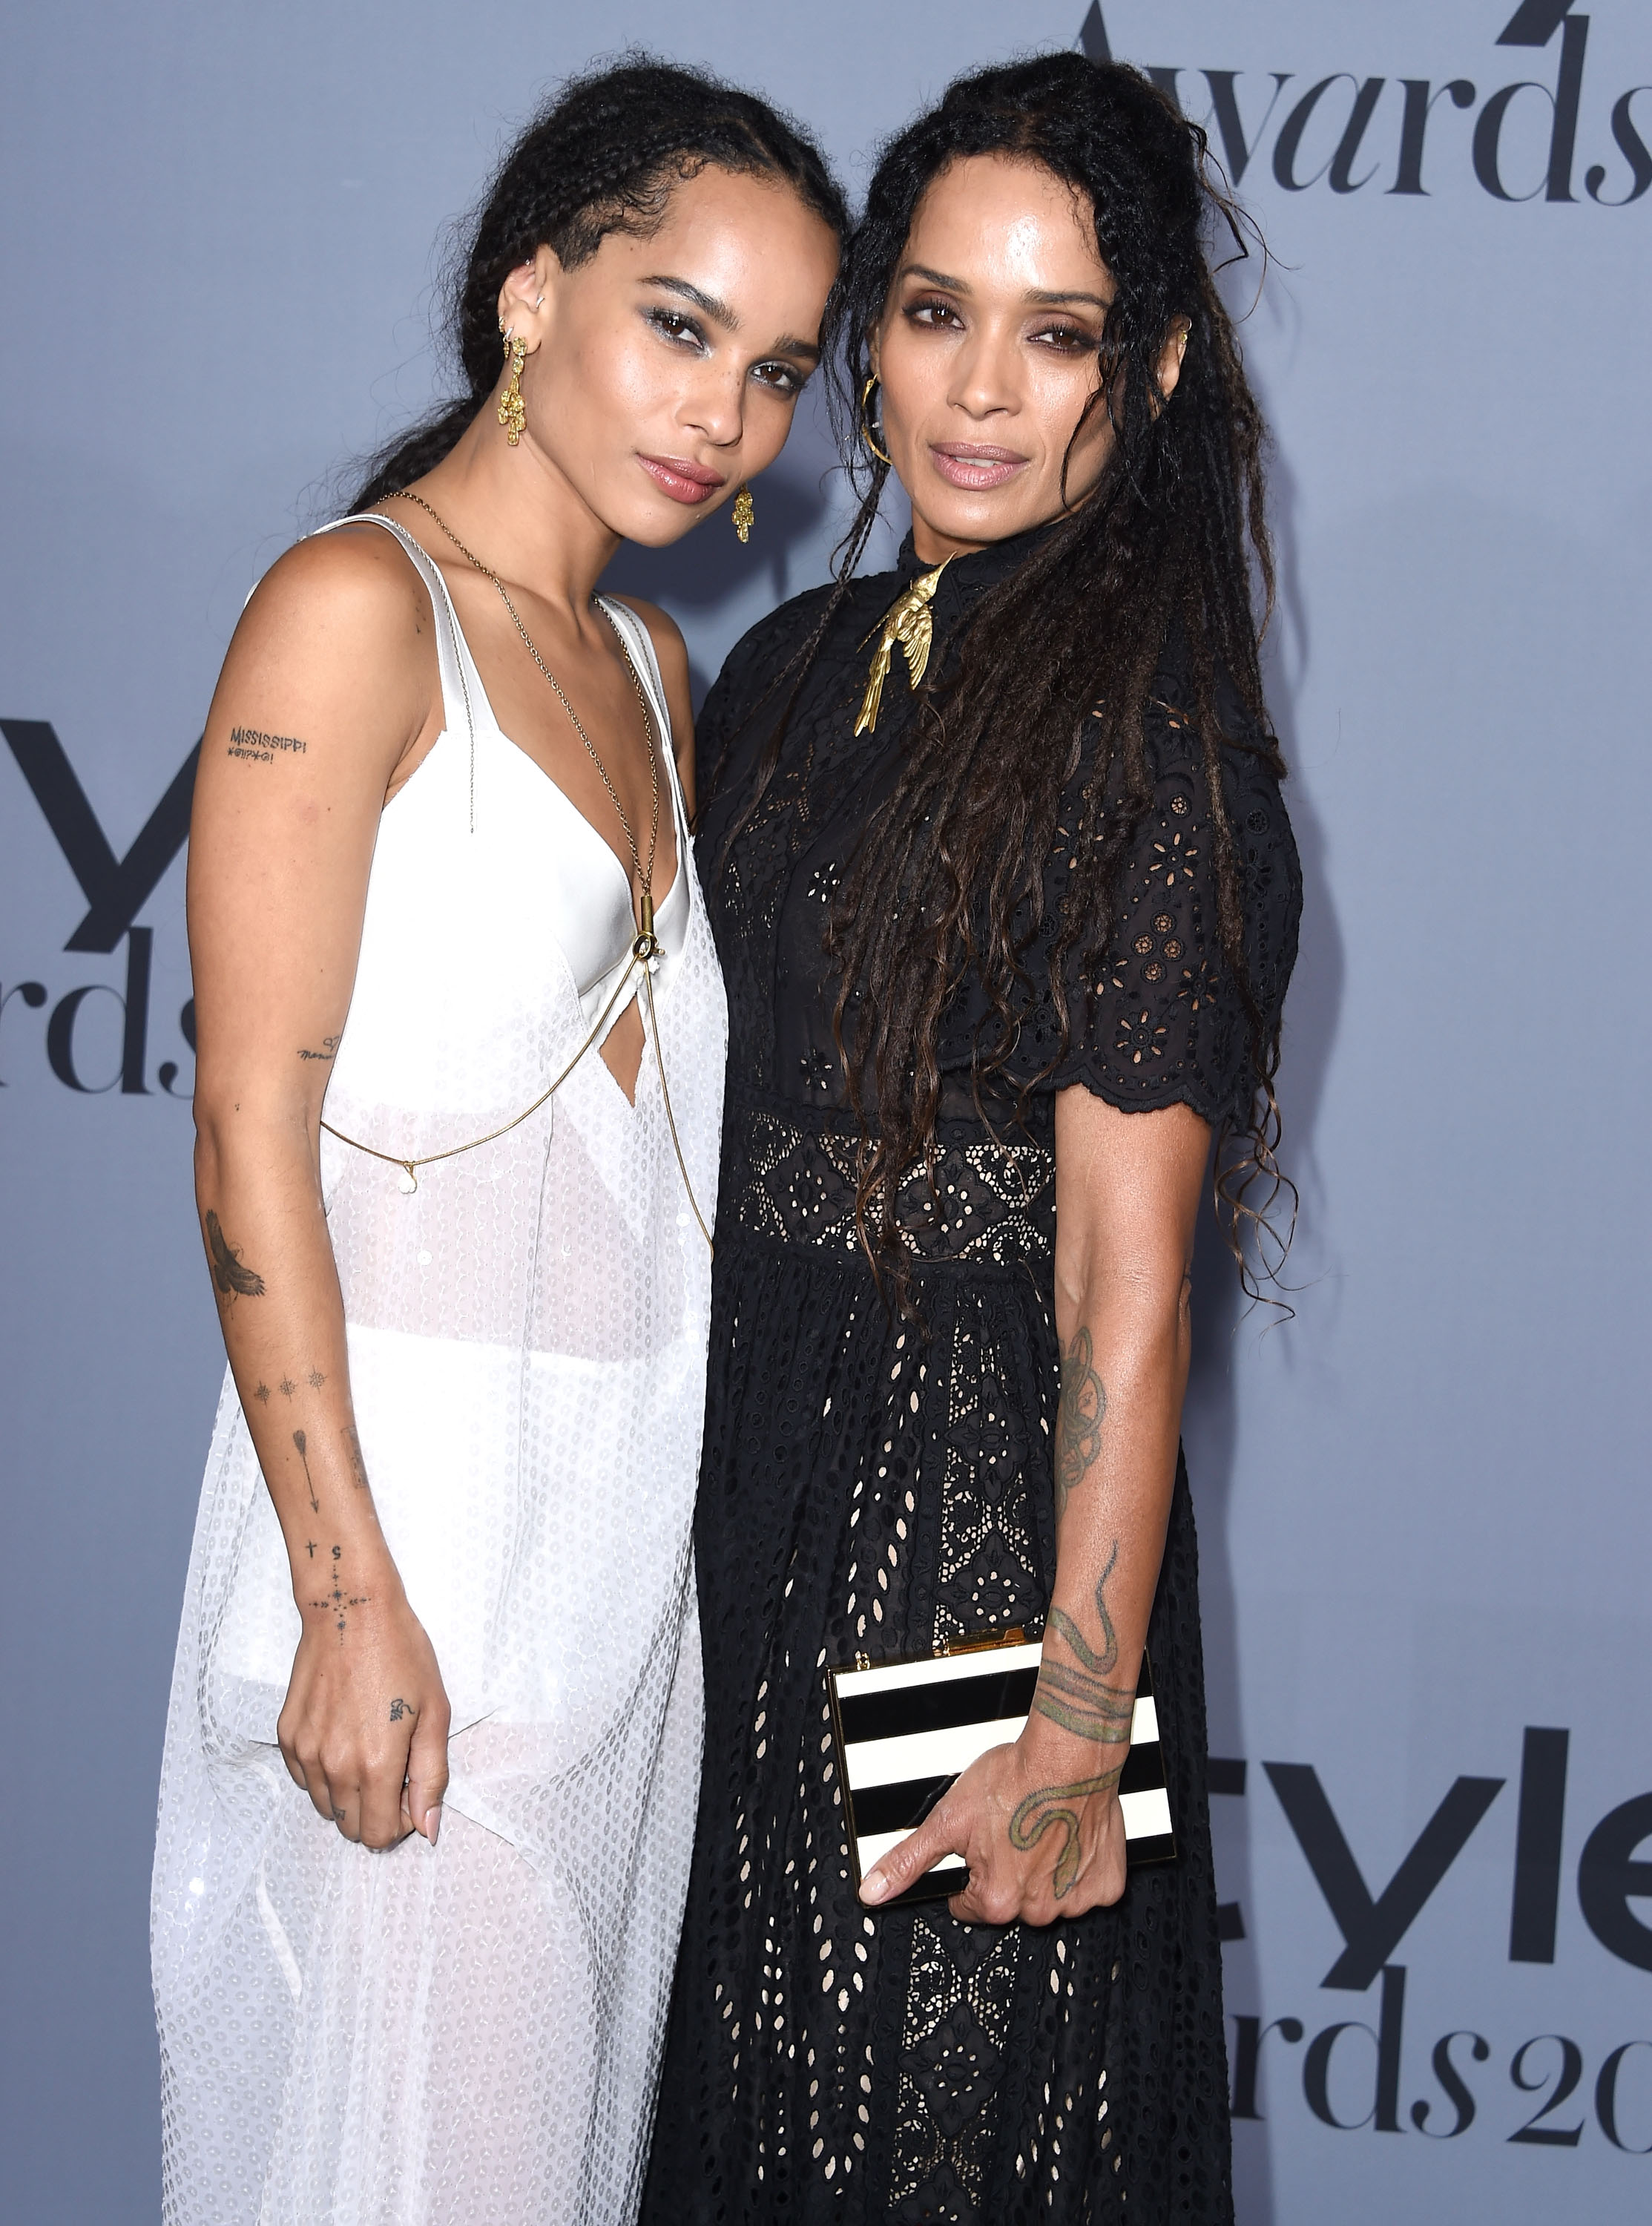 Zoe Kravitz and Lisa Bonet arrives at the InStyle Awards at Getty Center on October 26, 2015. (Photo by Steve Granitz/WireImage) (WireImage—2015 Steve Granitz)